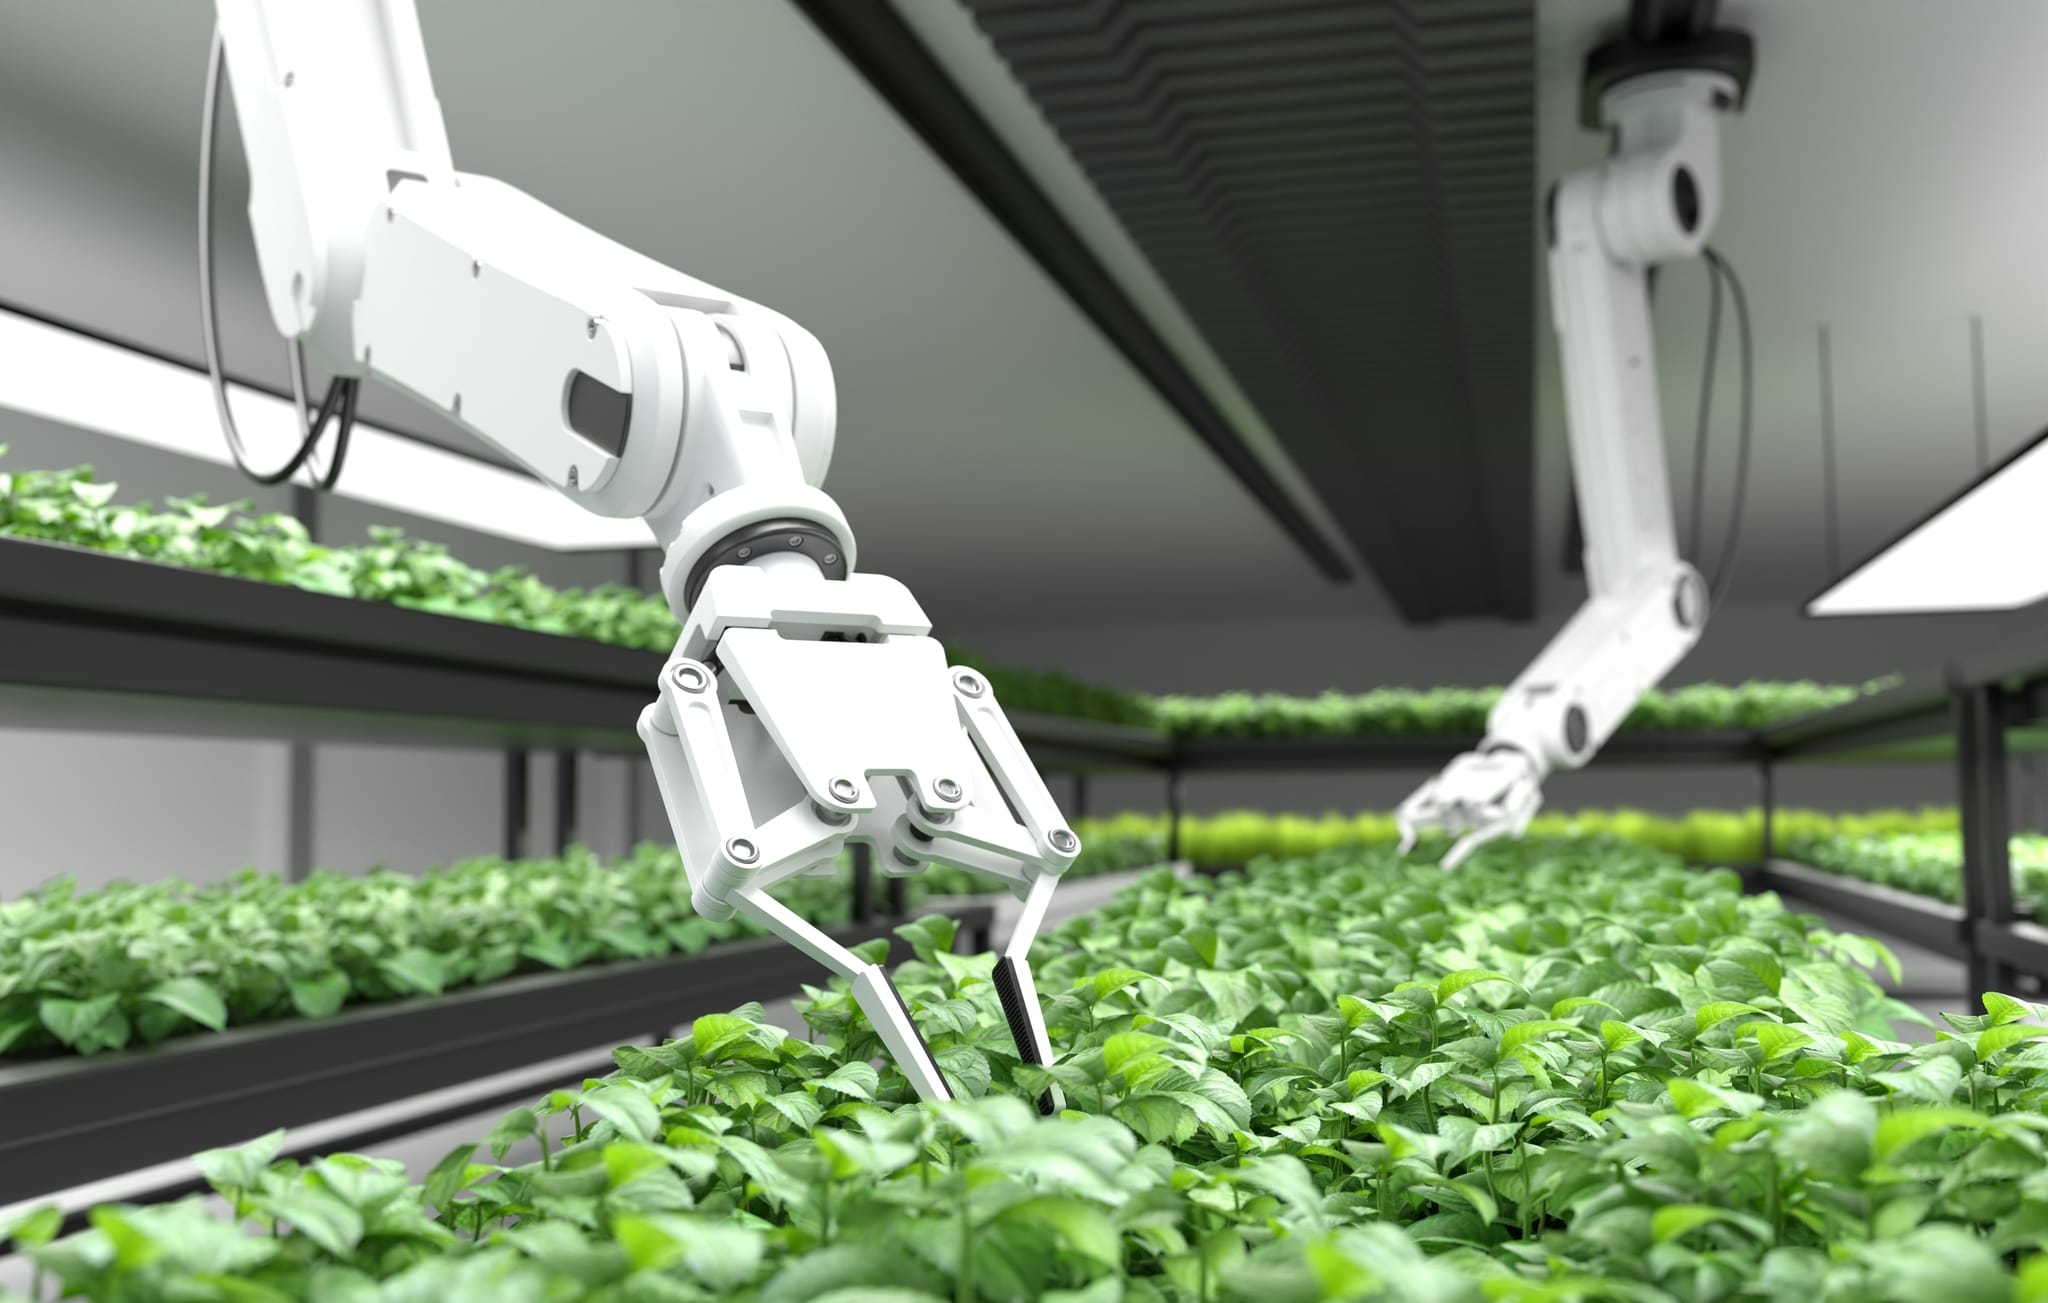 young plants in trays in indoor growing environment with two robotic arms reaching into the plants on the center tray